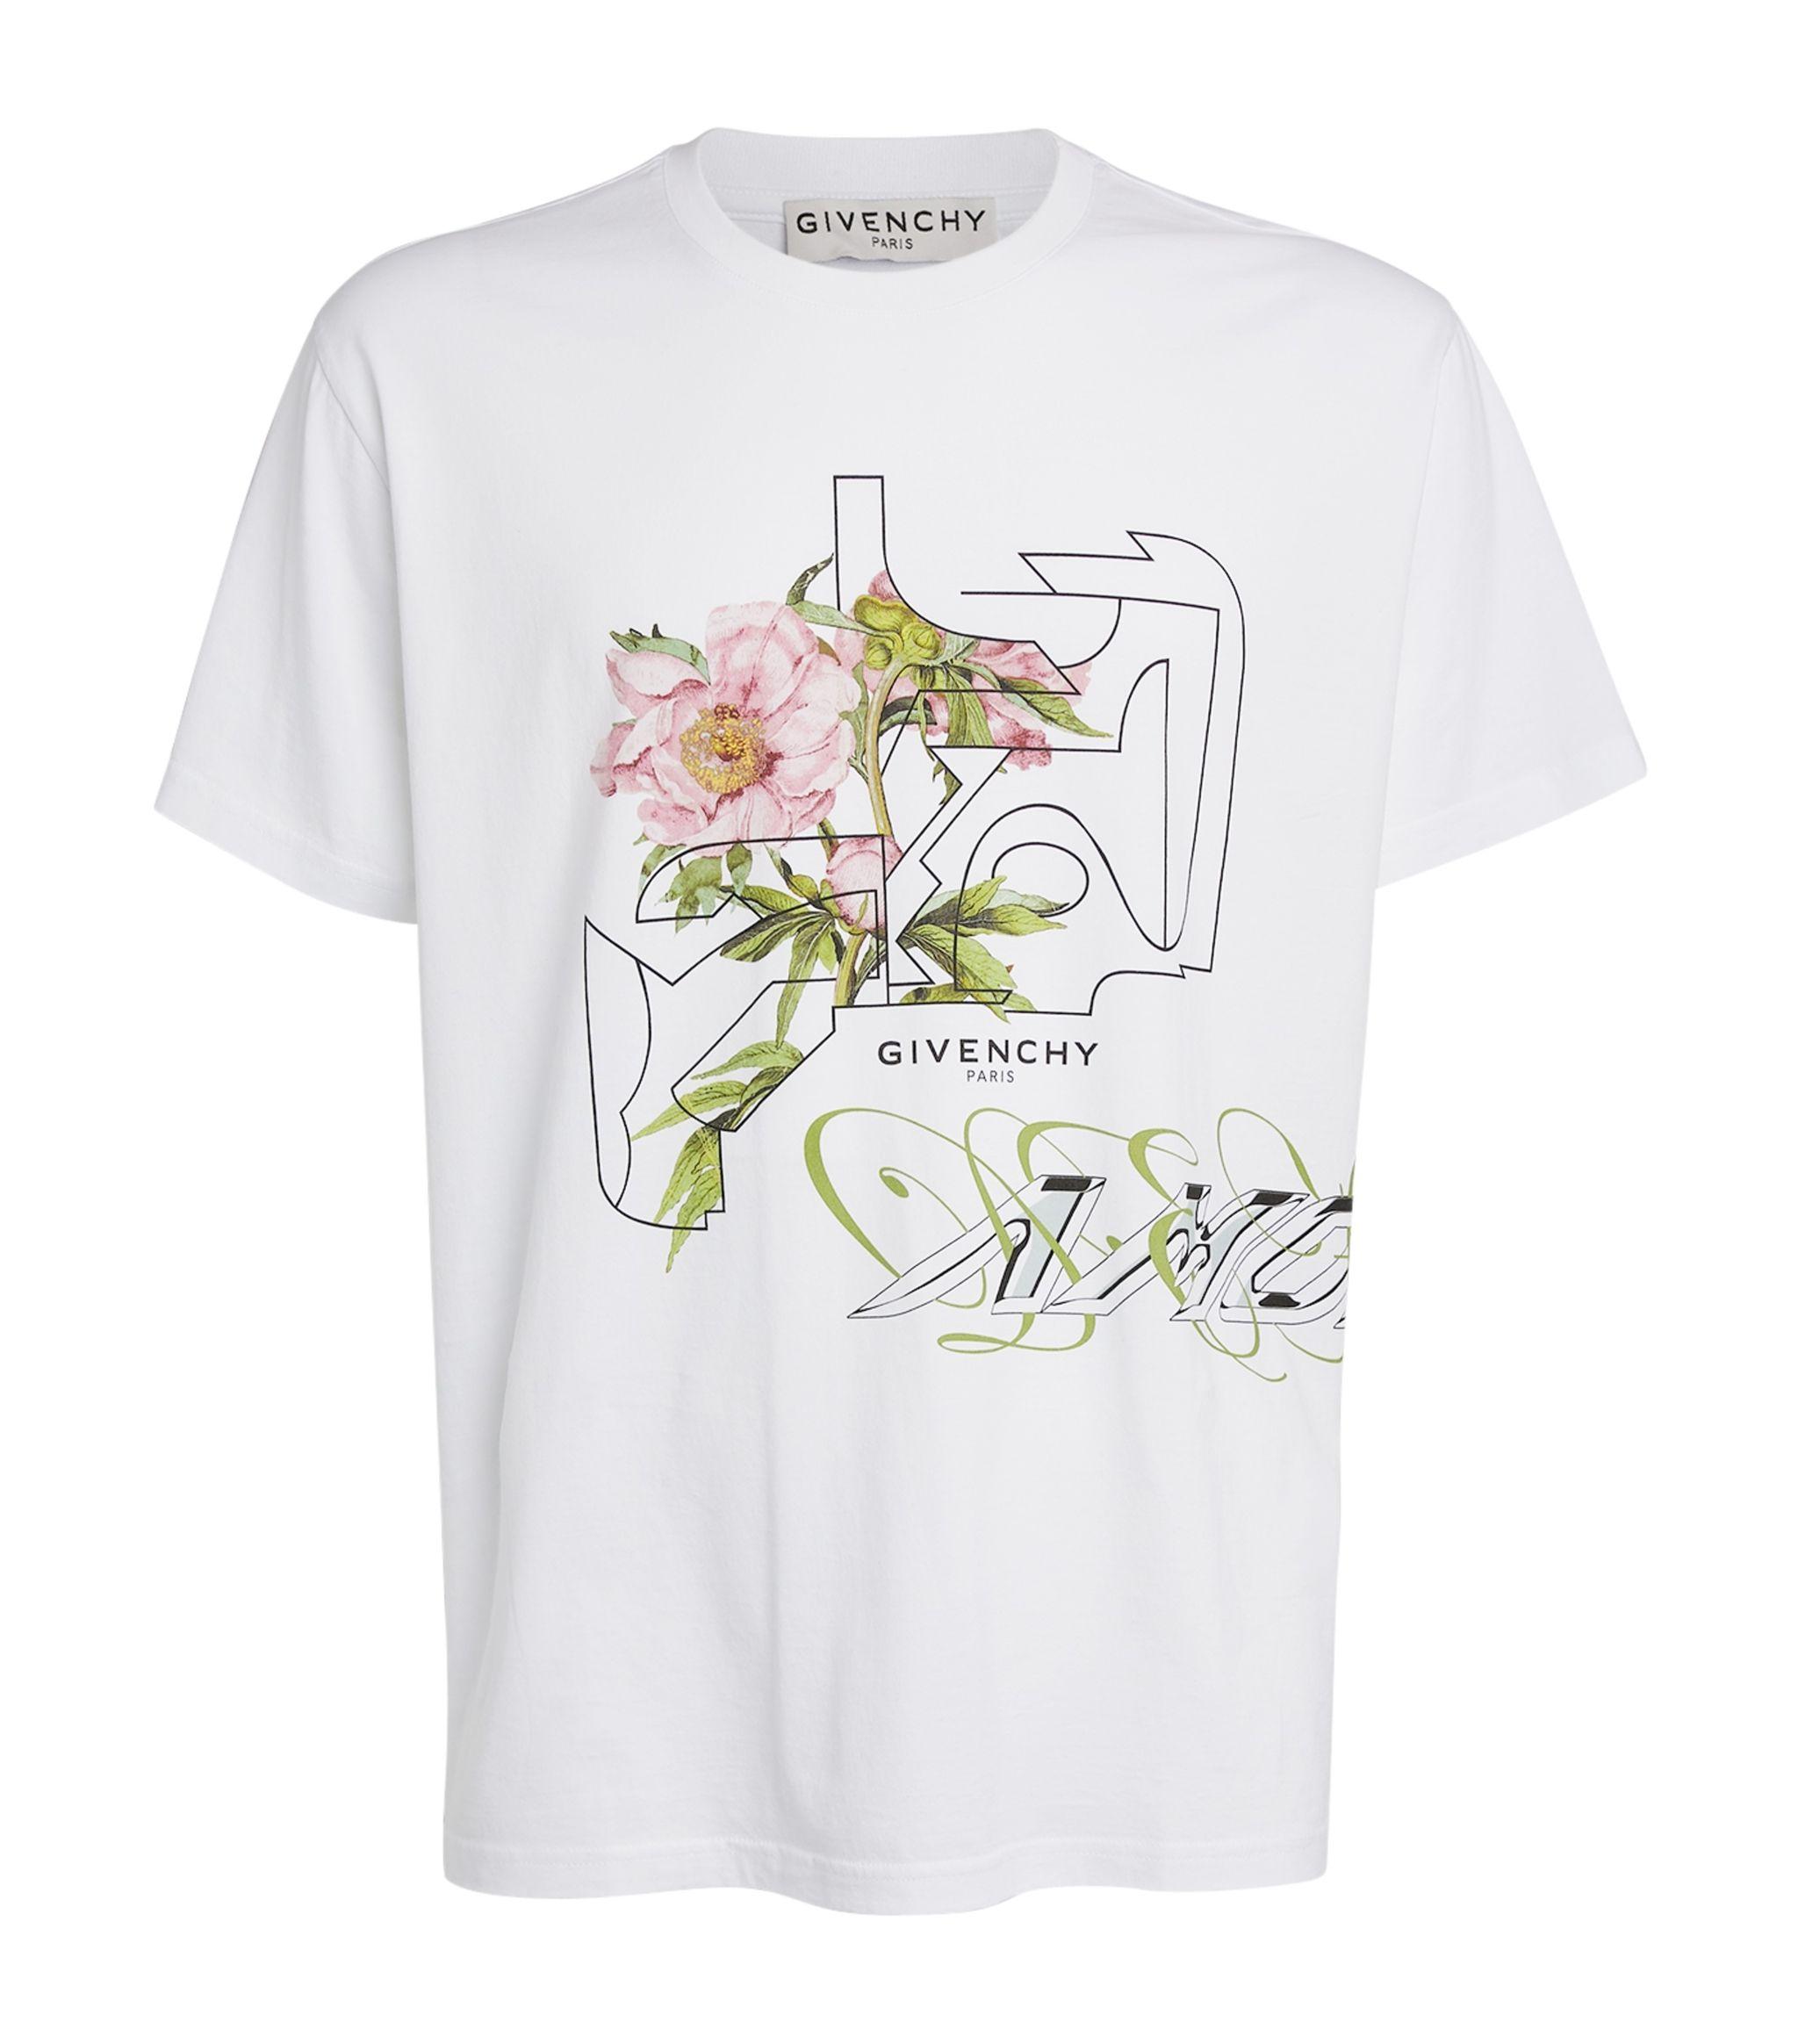 Givenchy Canvas Peony Print T-shirt in White for Men - Save 23% - Lyst